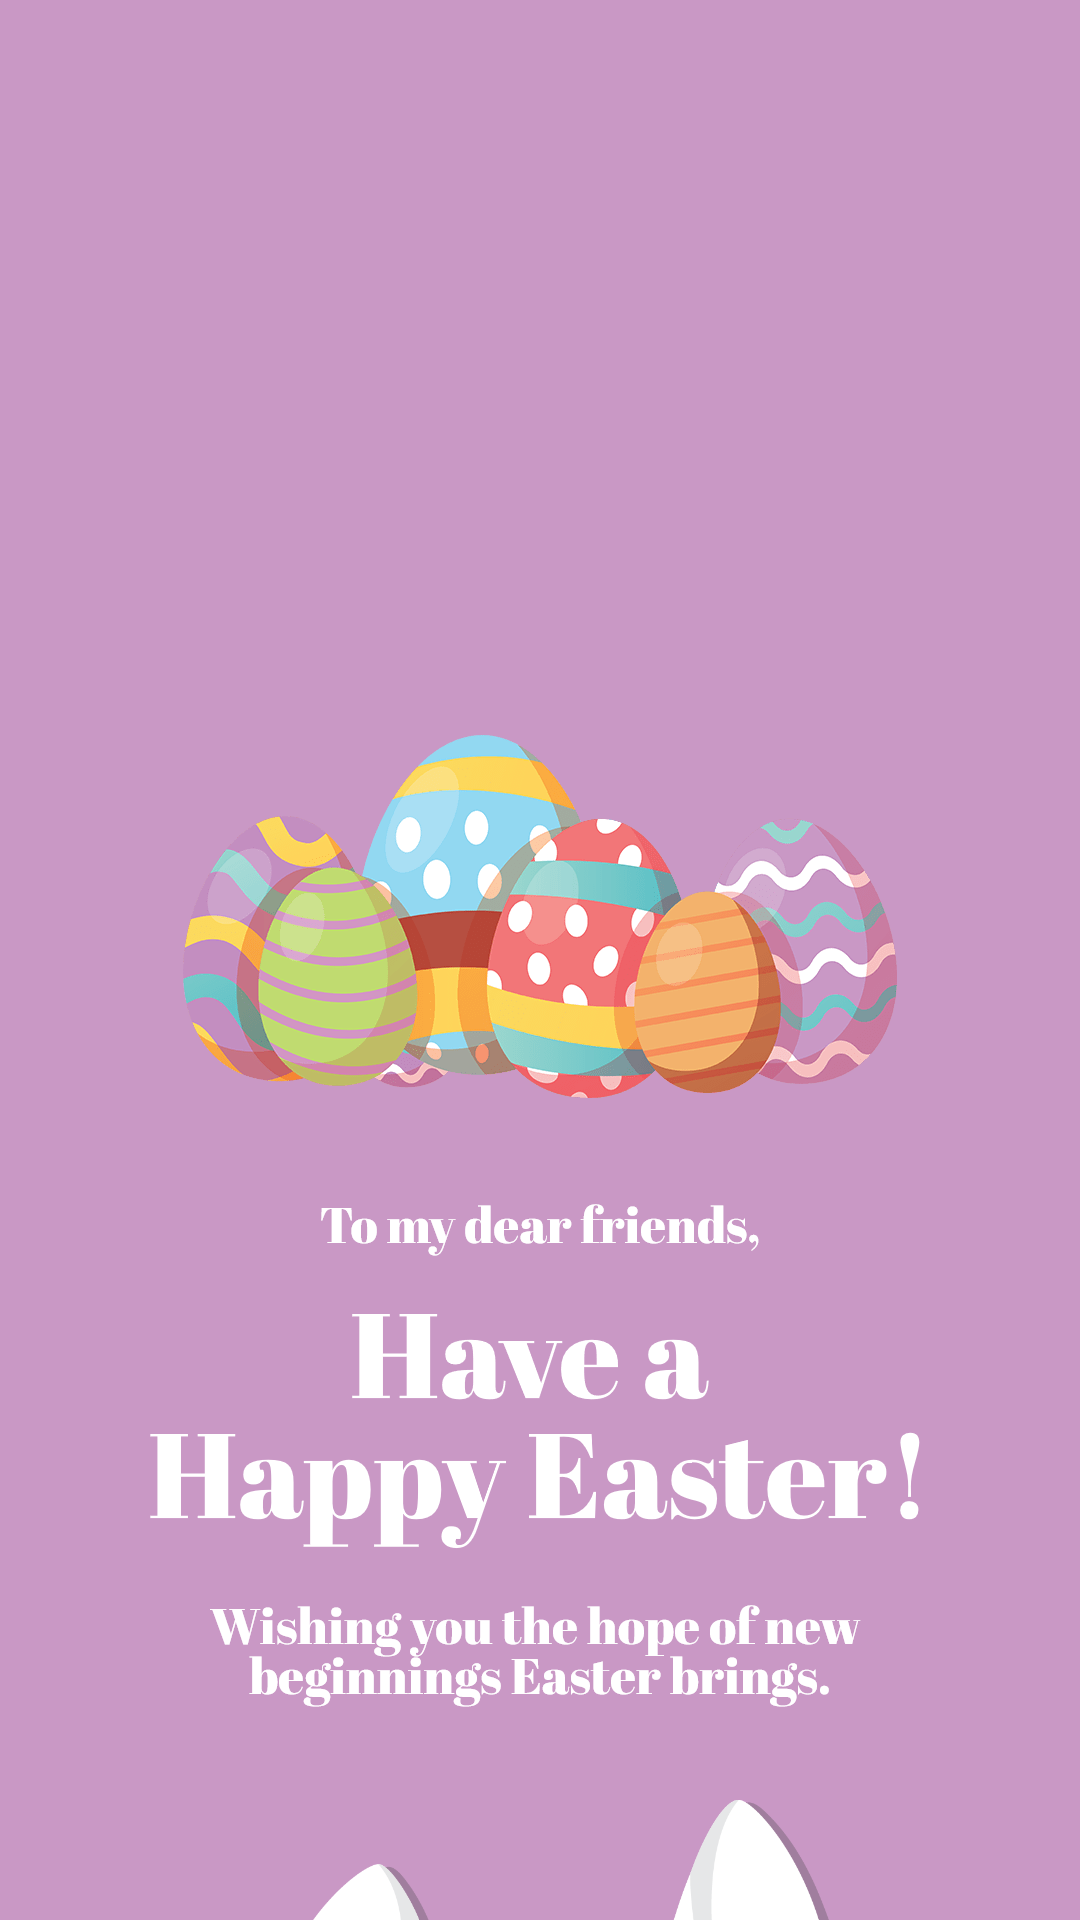 Happy Easter Design Template - Animation Template - #1579914